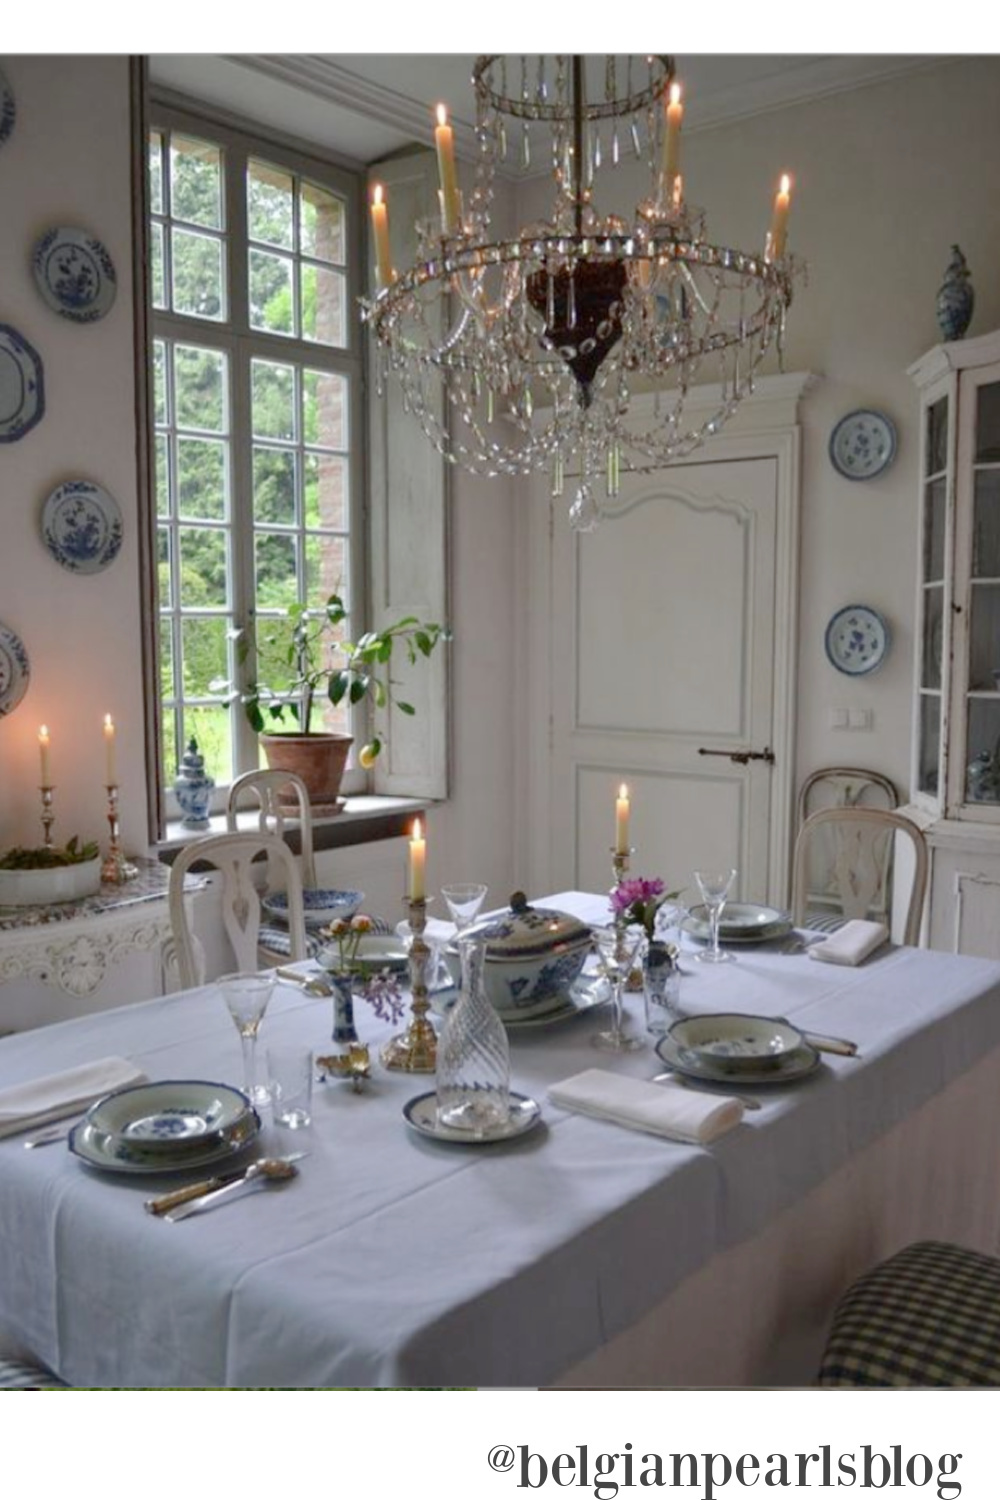 Peaceful traditional Christmas decor in an elegant Belgian dining room - Belgian Pearls. #whitechristmasdecor #countrychristmas #elegantchristmas